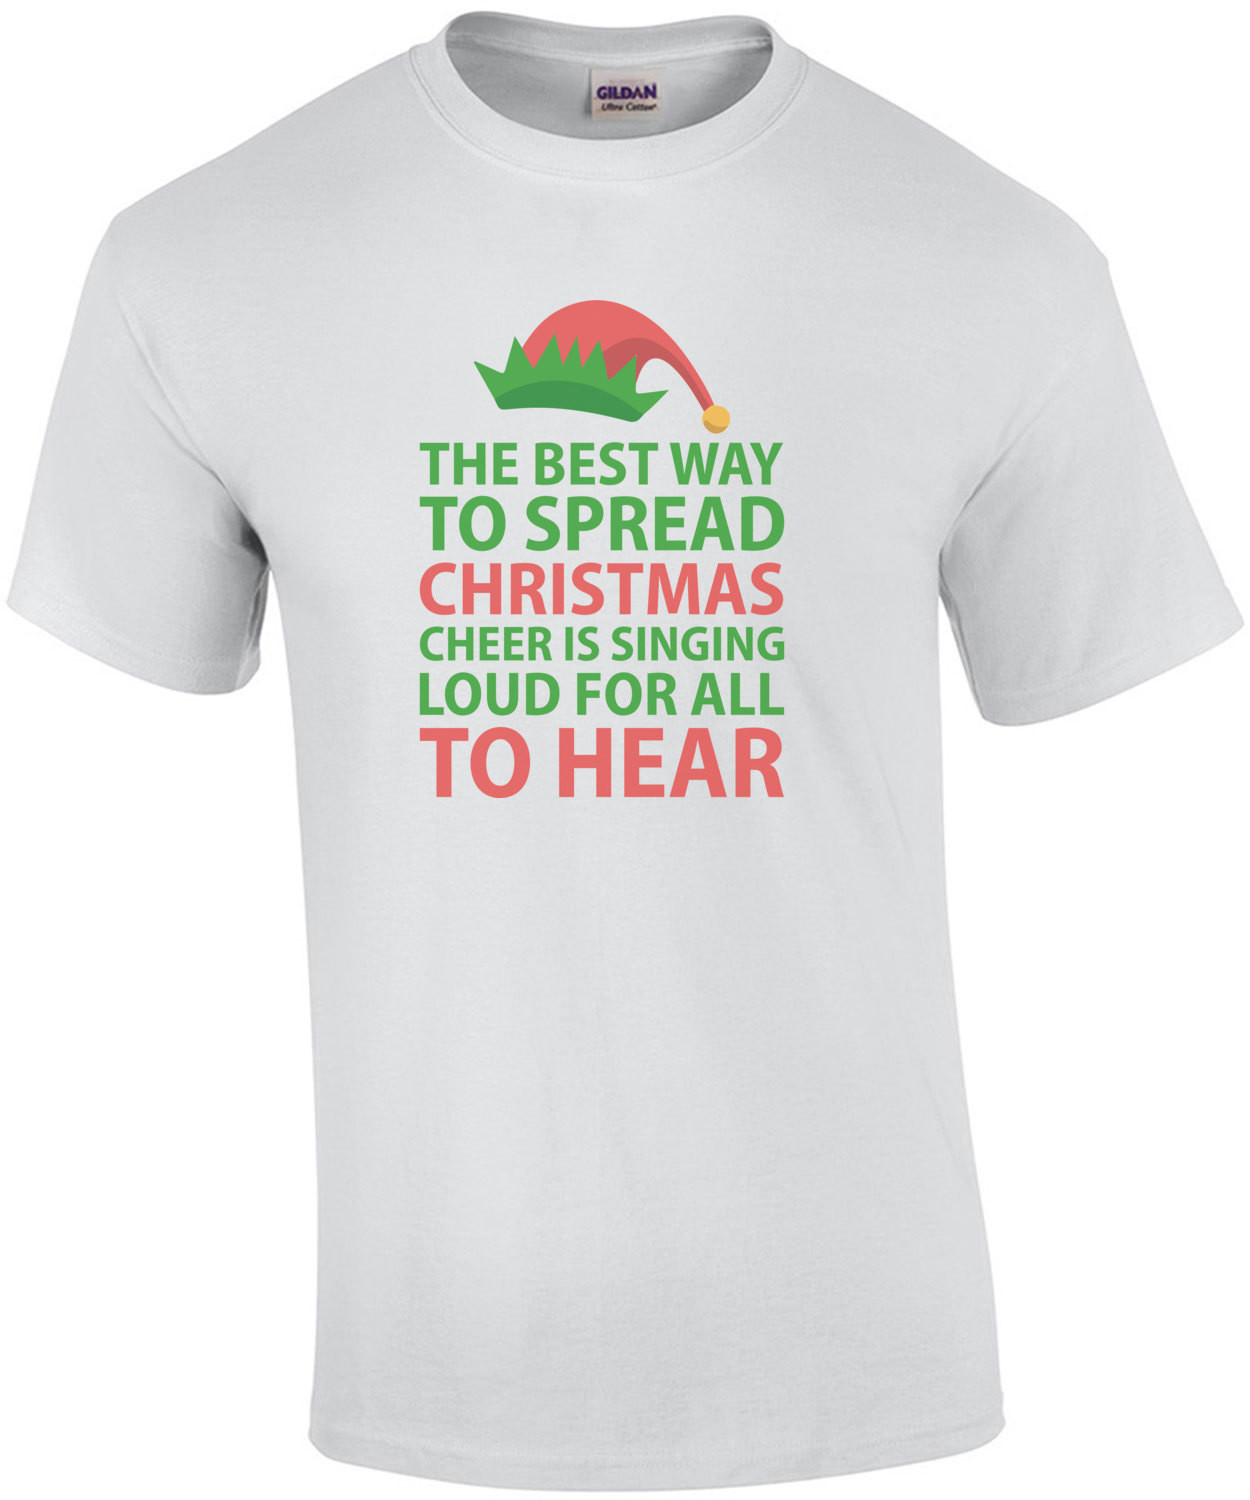 The Best Way To Spread Christmas Cheer Is Singing Loud For All To Hear - Elf movie - Will Ferrel - T-Shirt - Christmas T-Shirt